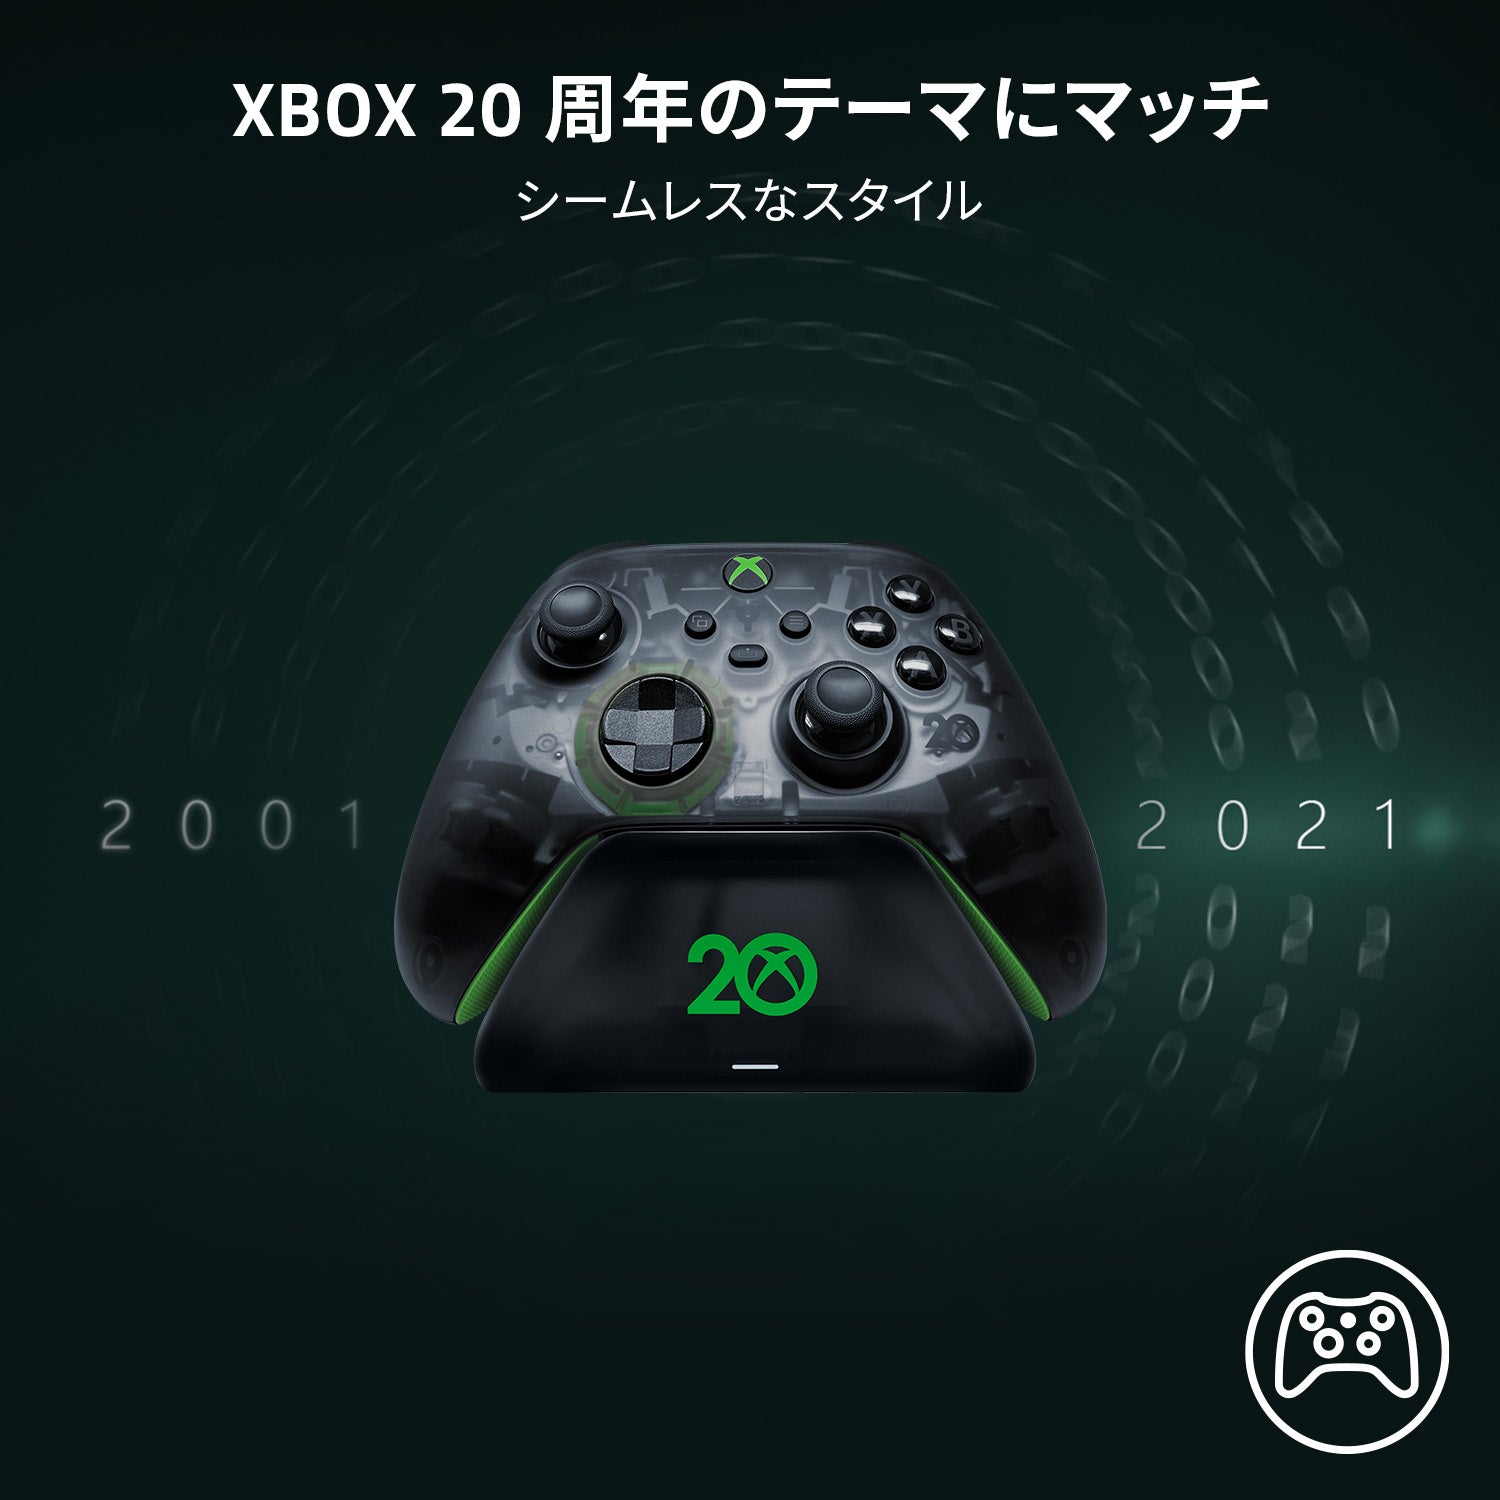 Razer Universal Quick Charging Stand for Xbox Xbox 20th Anniversary Limited Edition  ユニバーサル クイック チャージング スタンド thumbnail 3